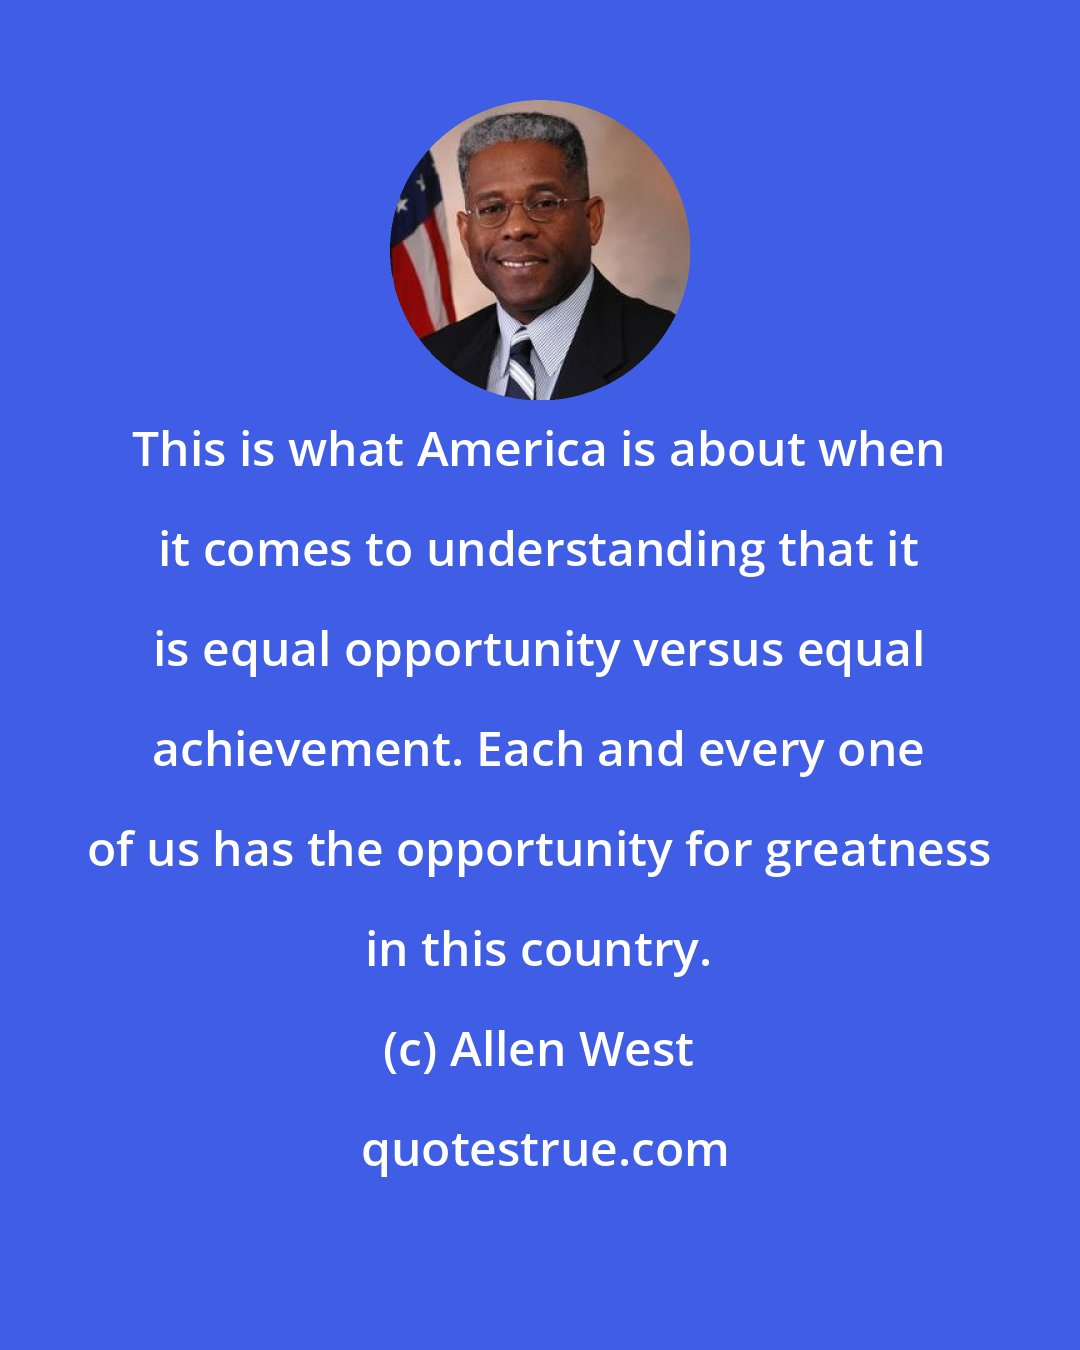 Allen West: This is what America is about when it comes to understanding that it is equal opportunity versus equal achievement. Each and every one of us has the opportunity for greatness in this country.